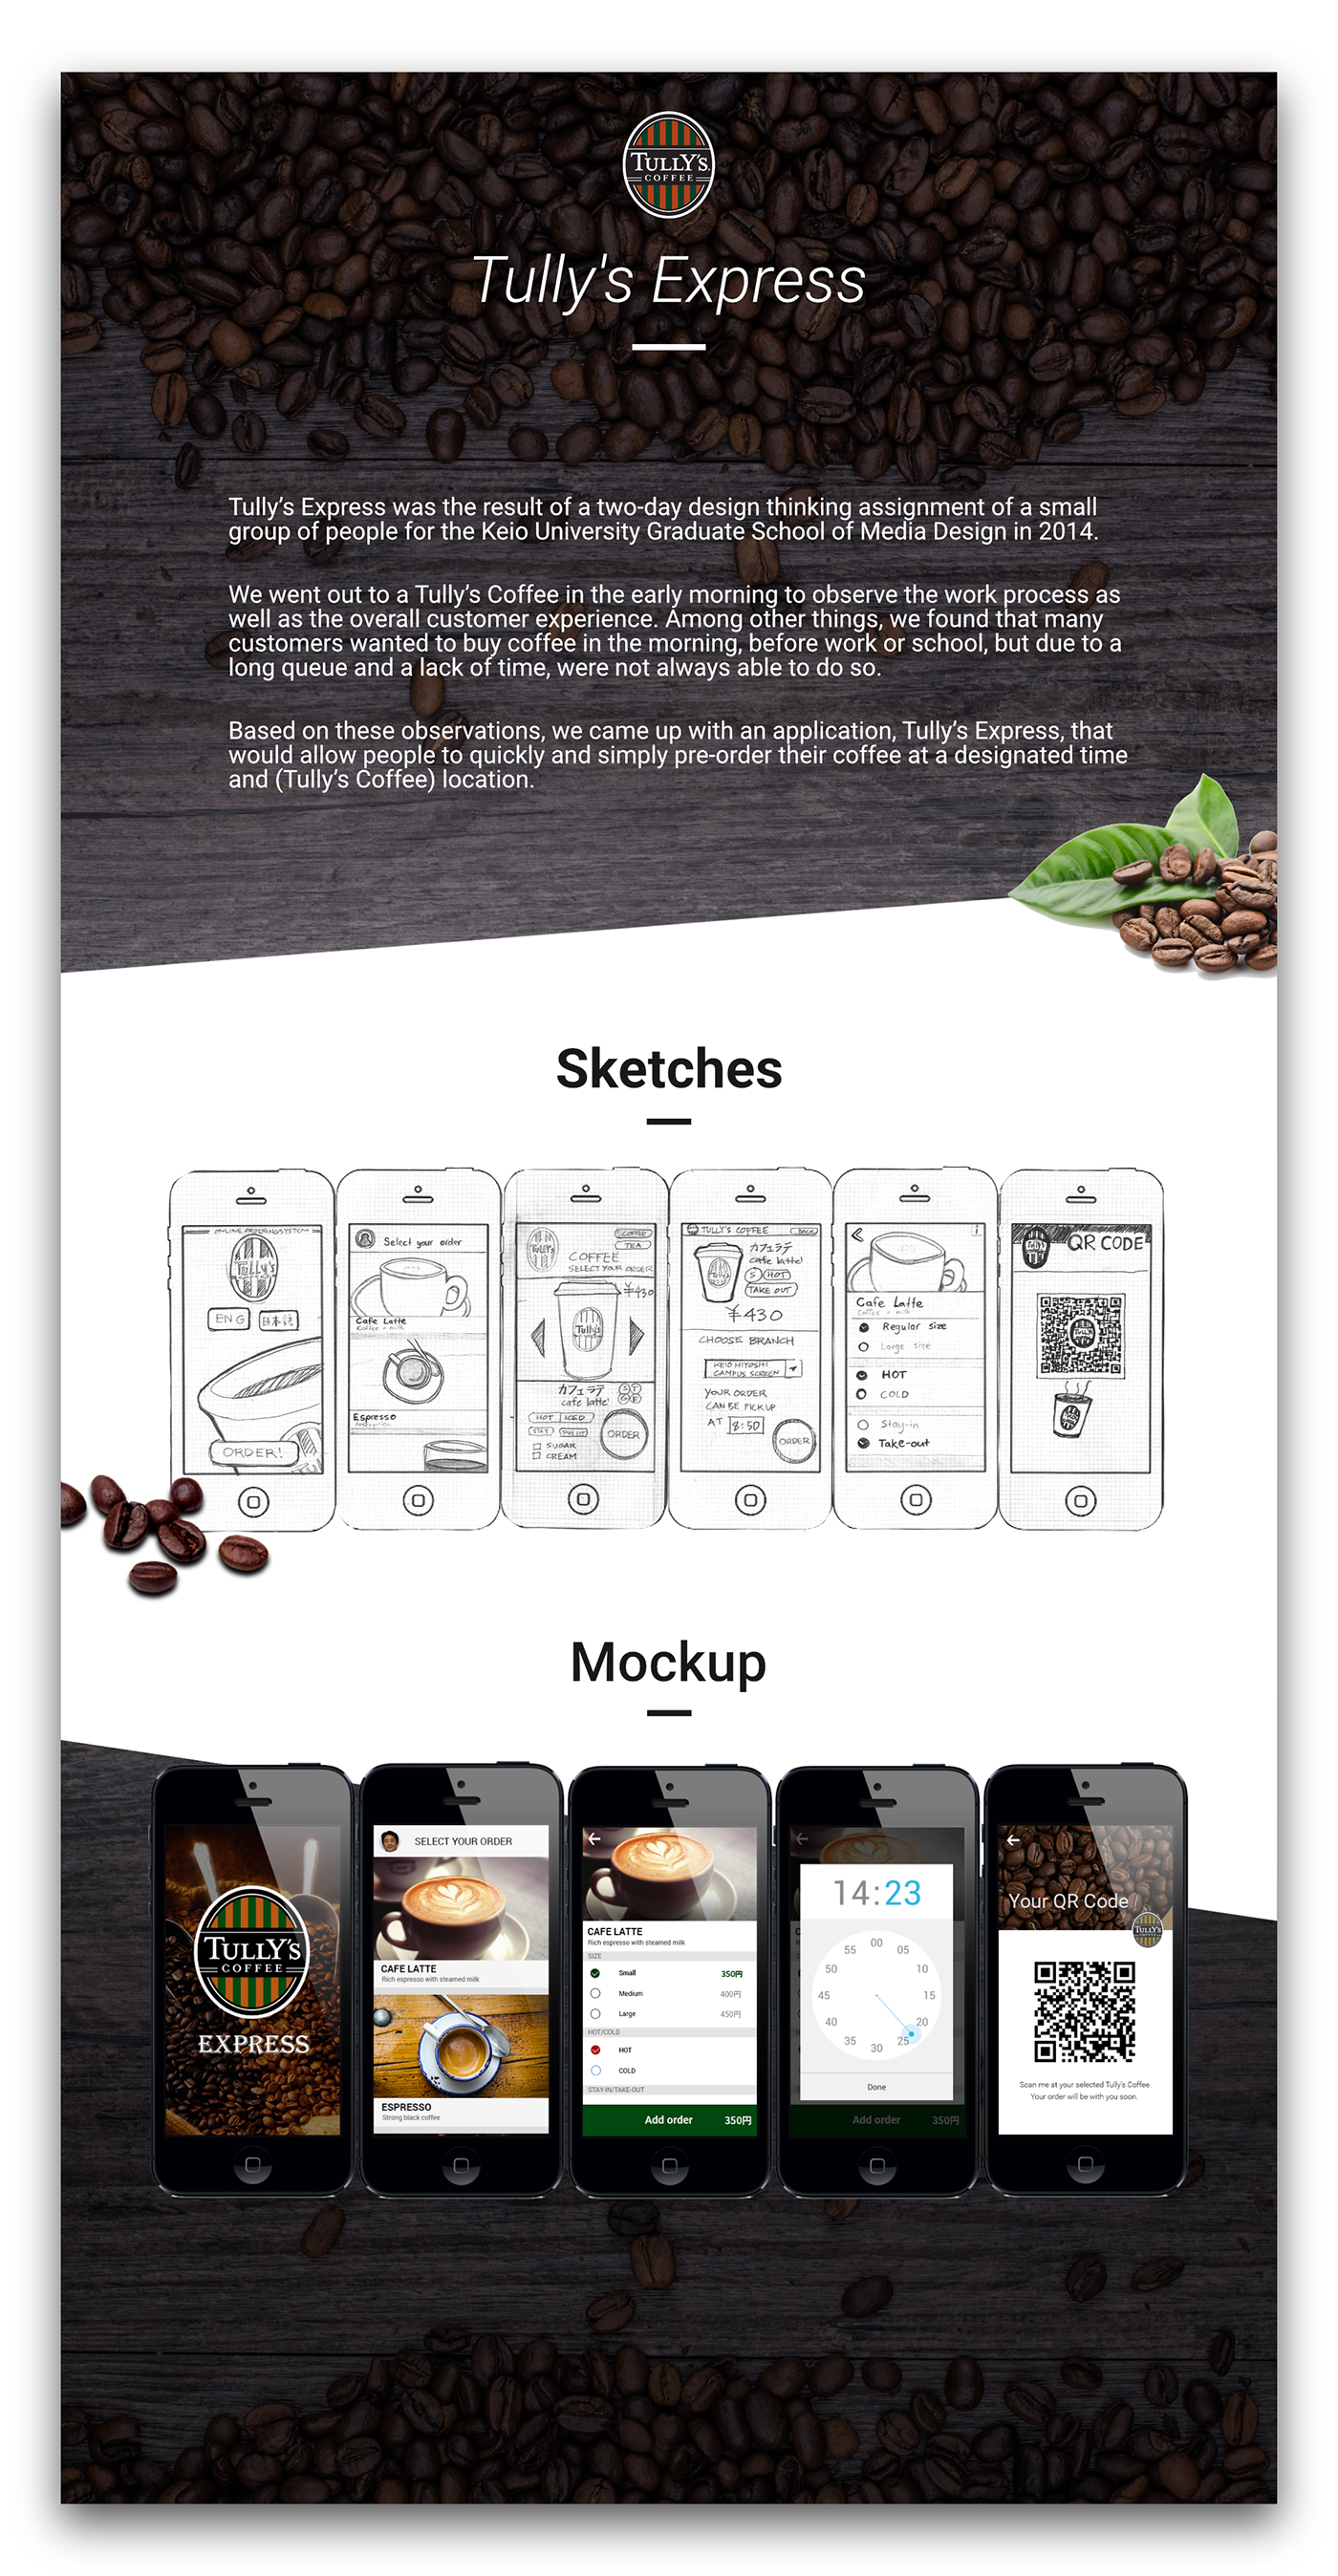 tully's Coffee cafe app experience design